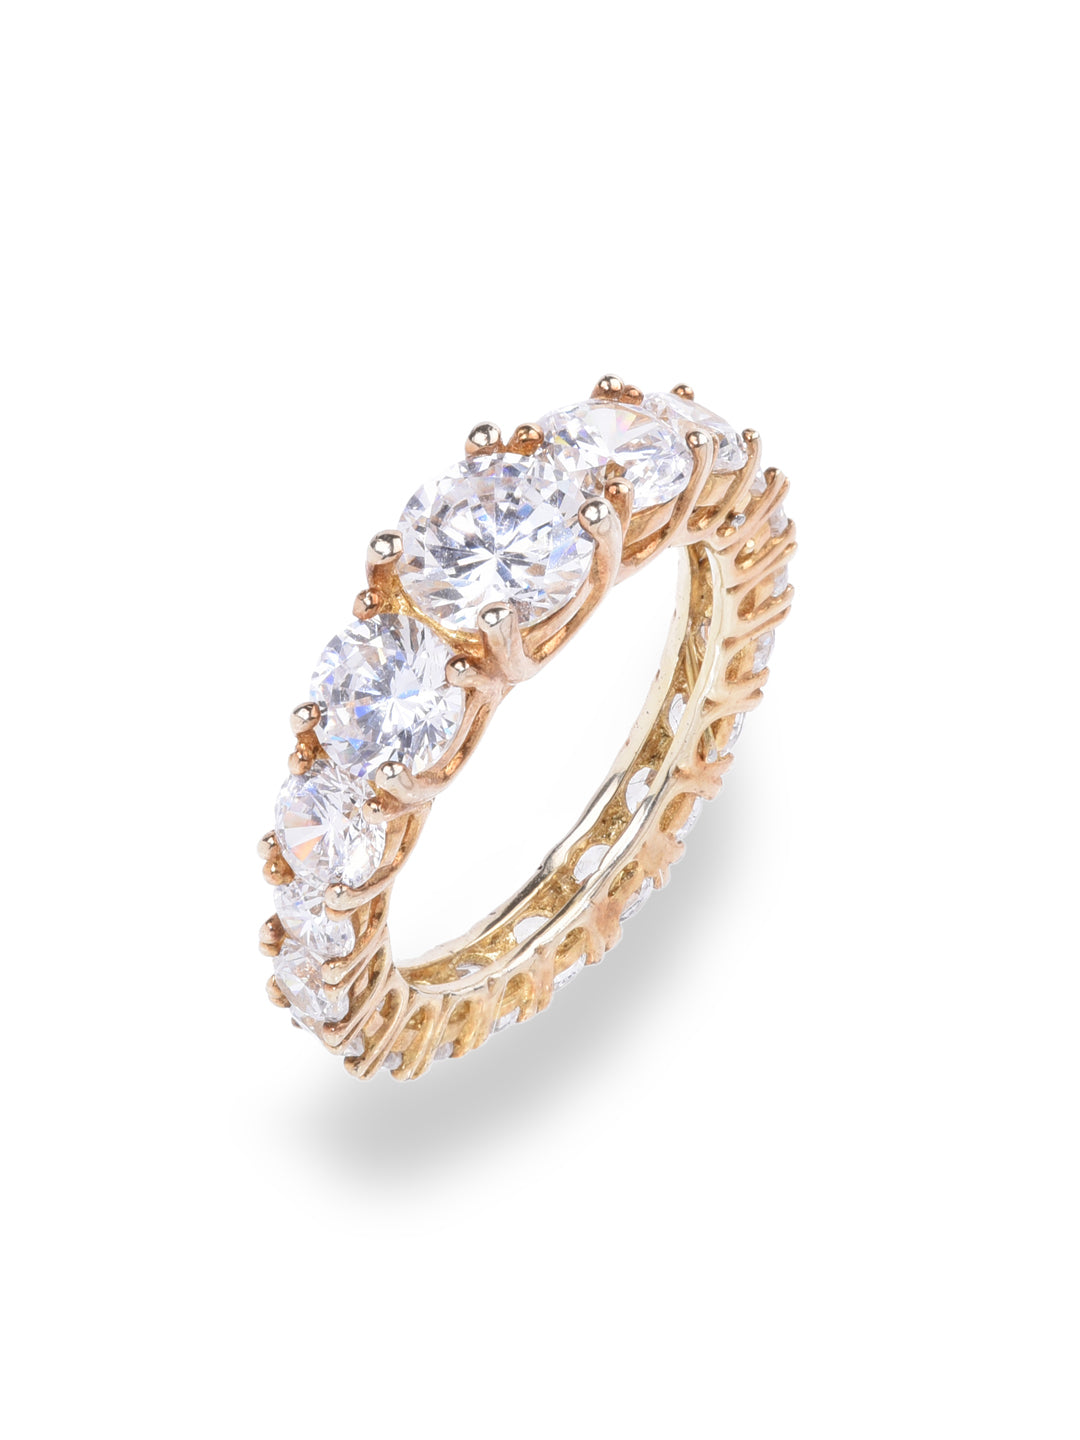 Graded round solitaire diamond band